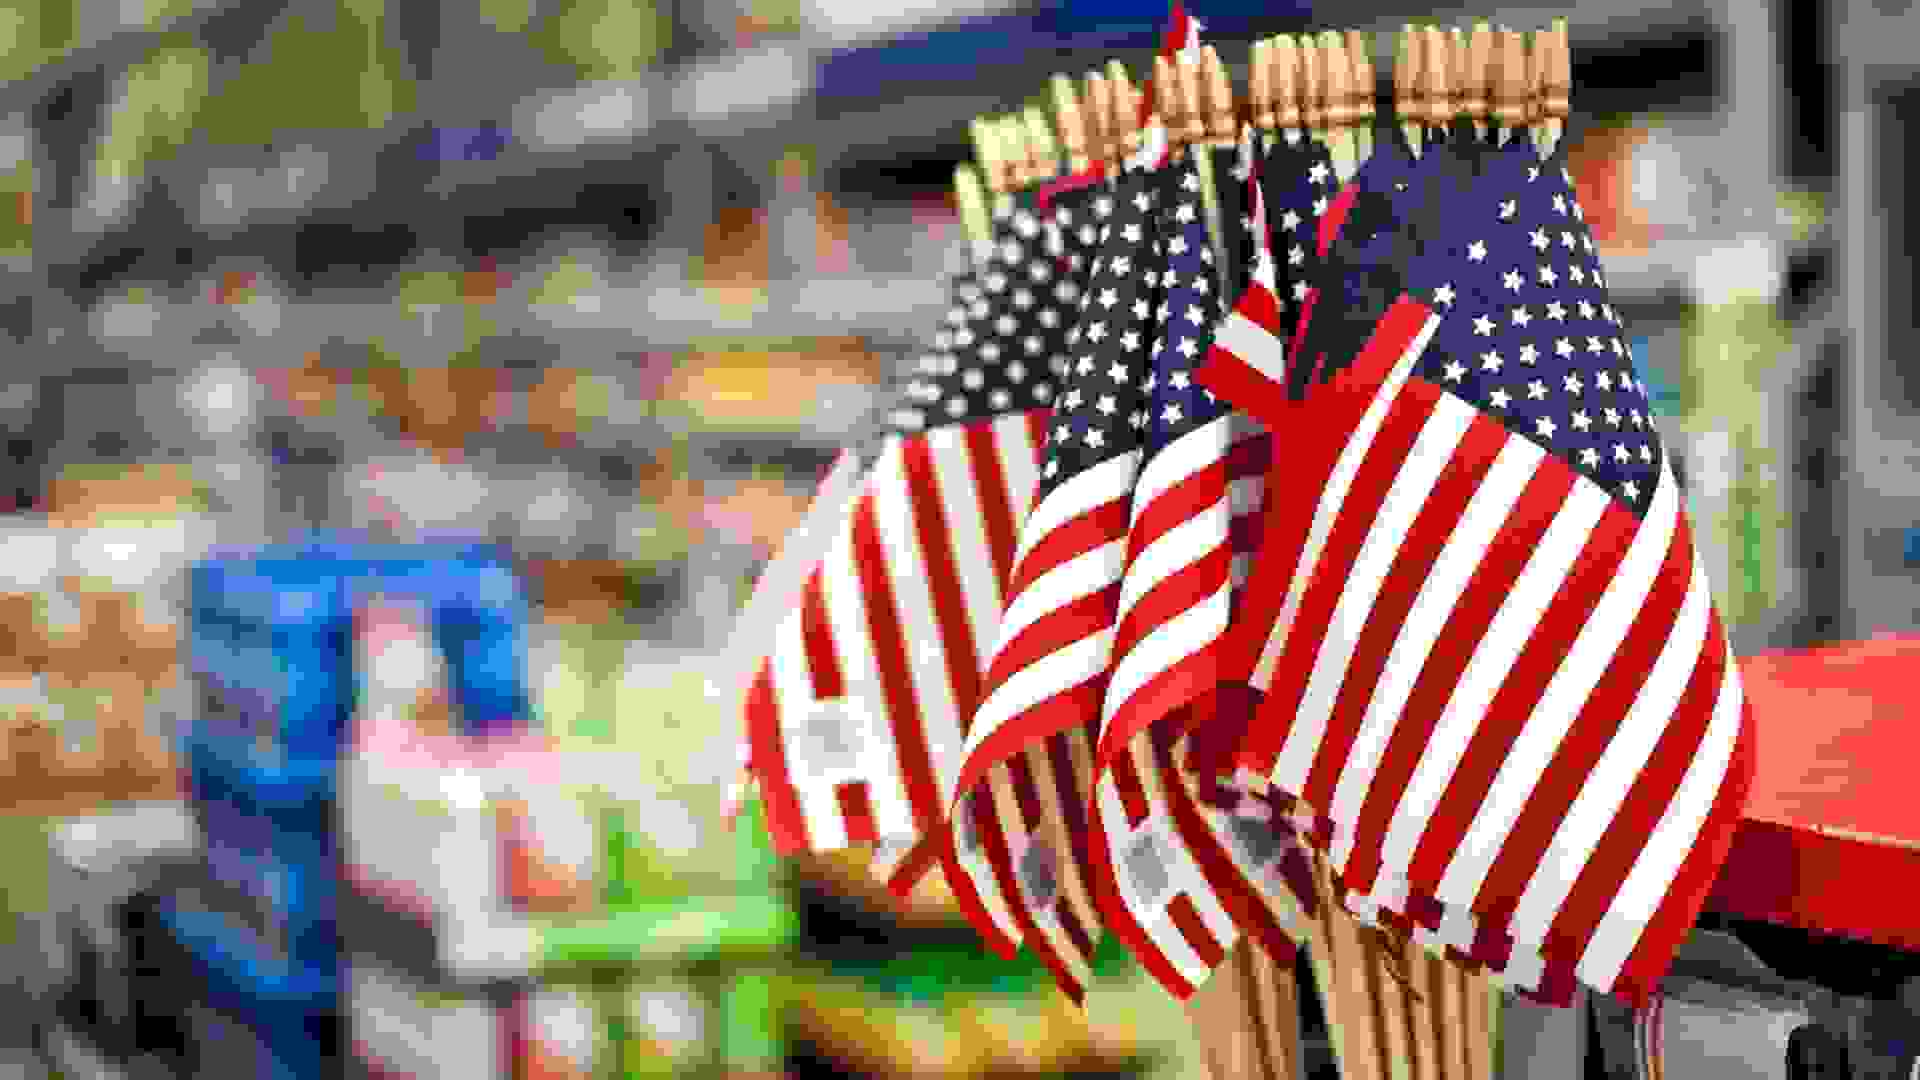 American flags for sale in a Megastore.